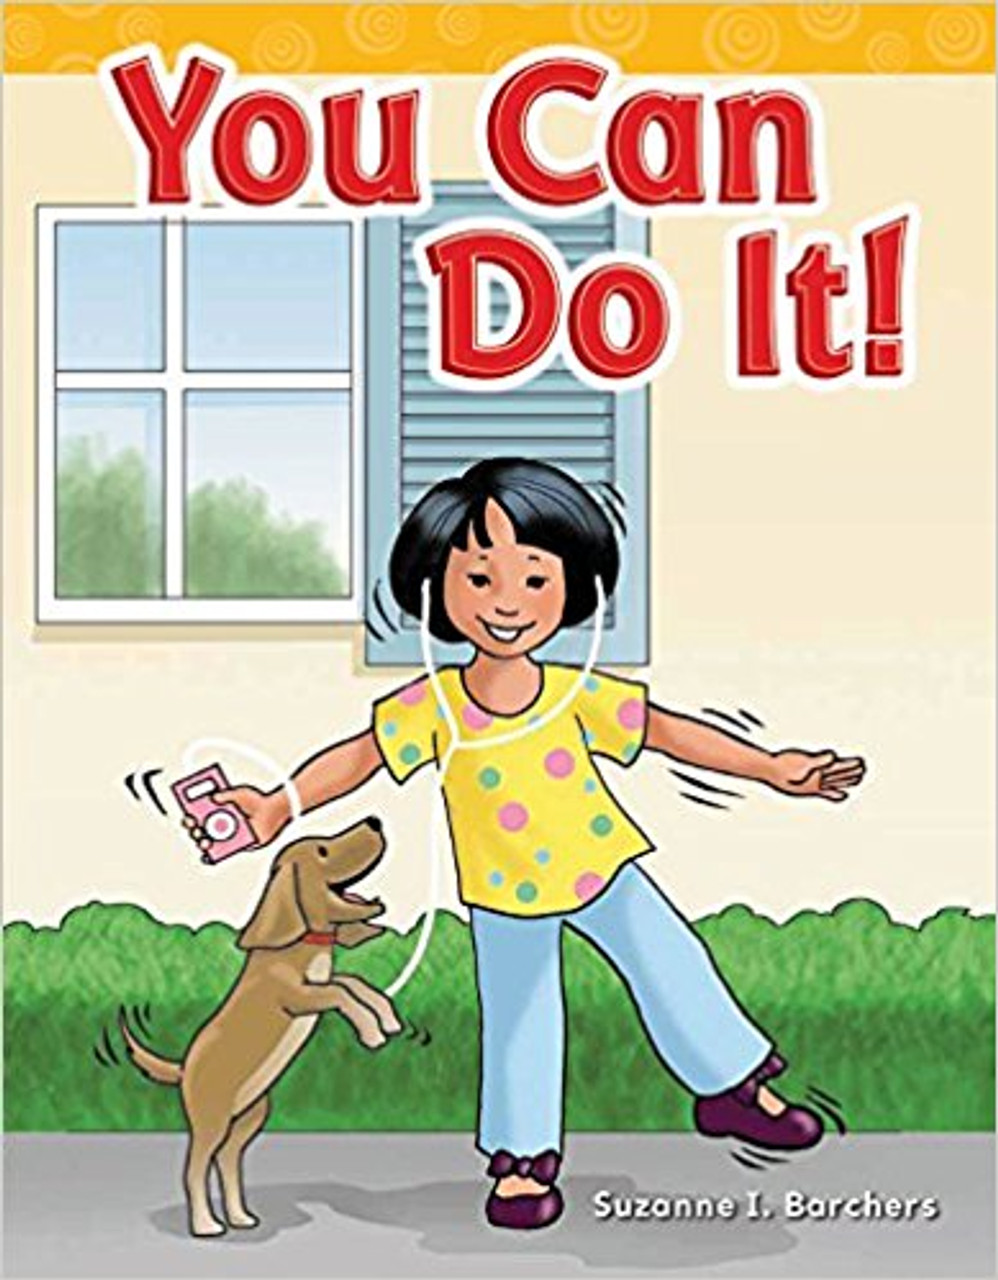 You Can Do It! by Suzanne I Barchers